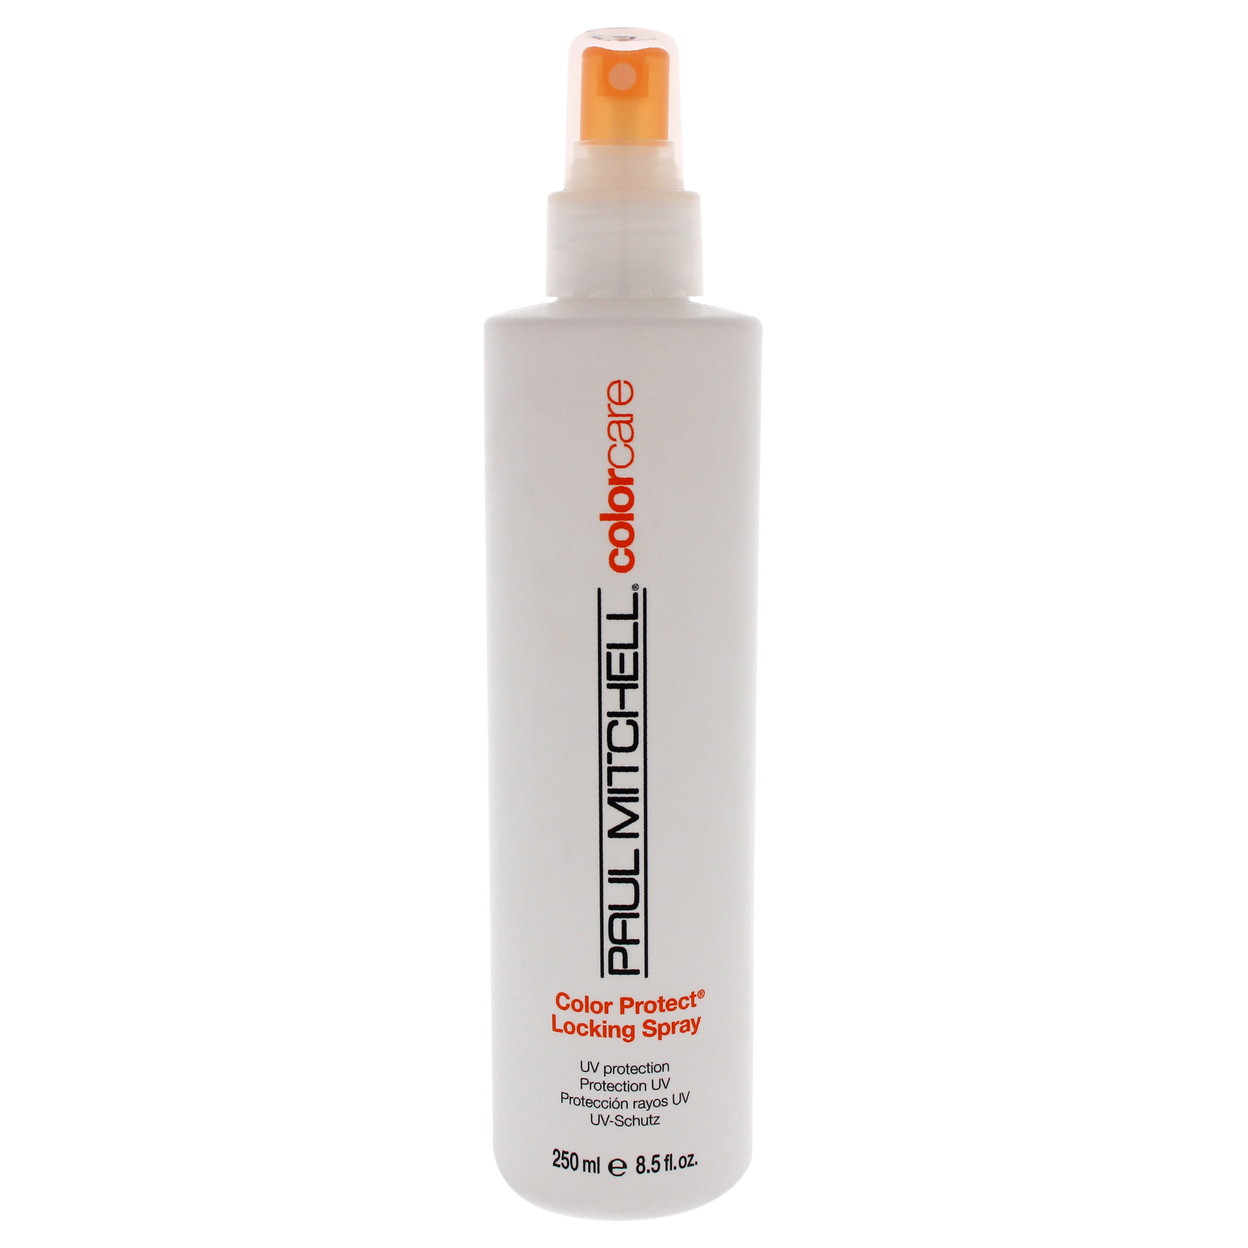 Paul Mitchell Unisex HAIRCARE Color Protect Locking Spray 8.5 Oz